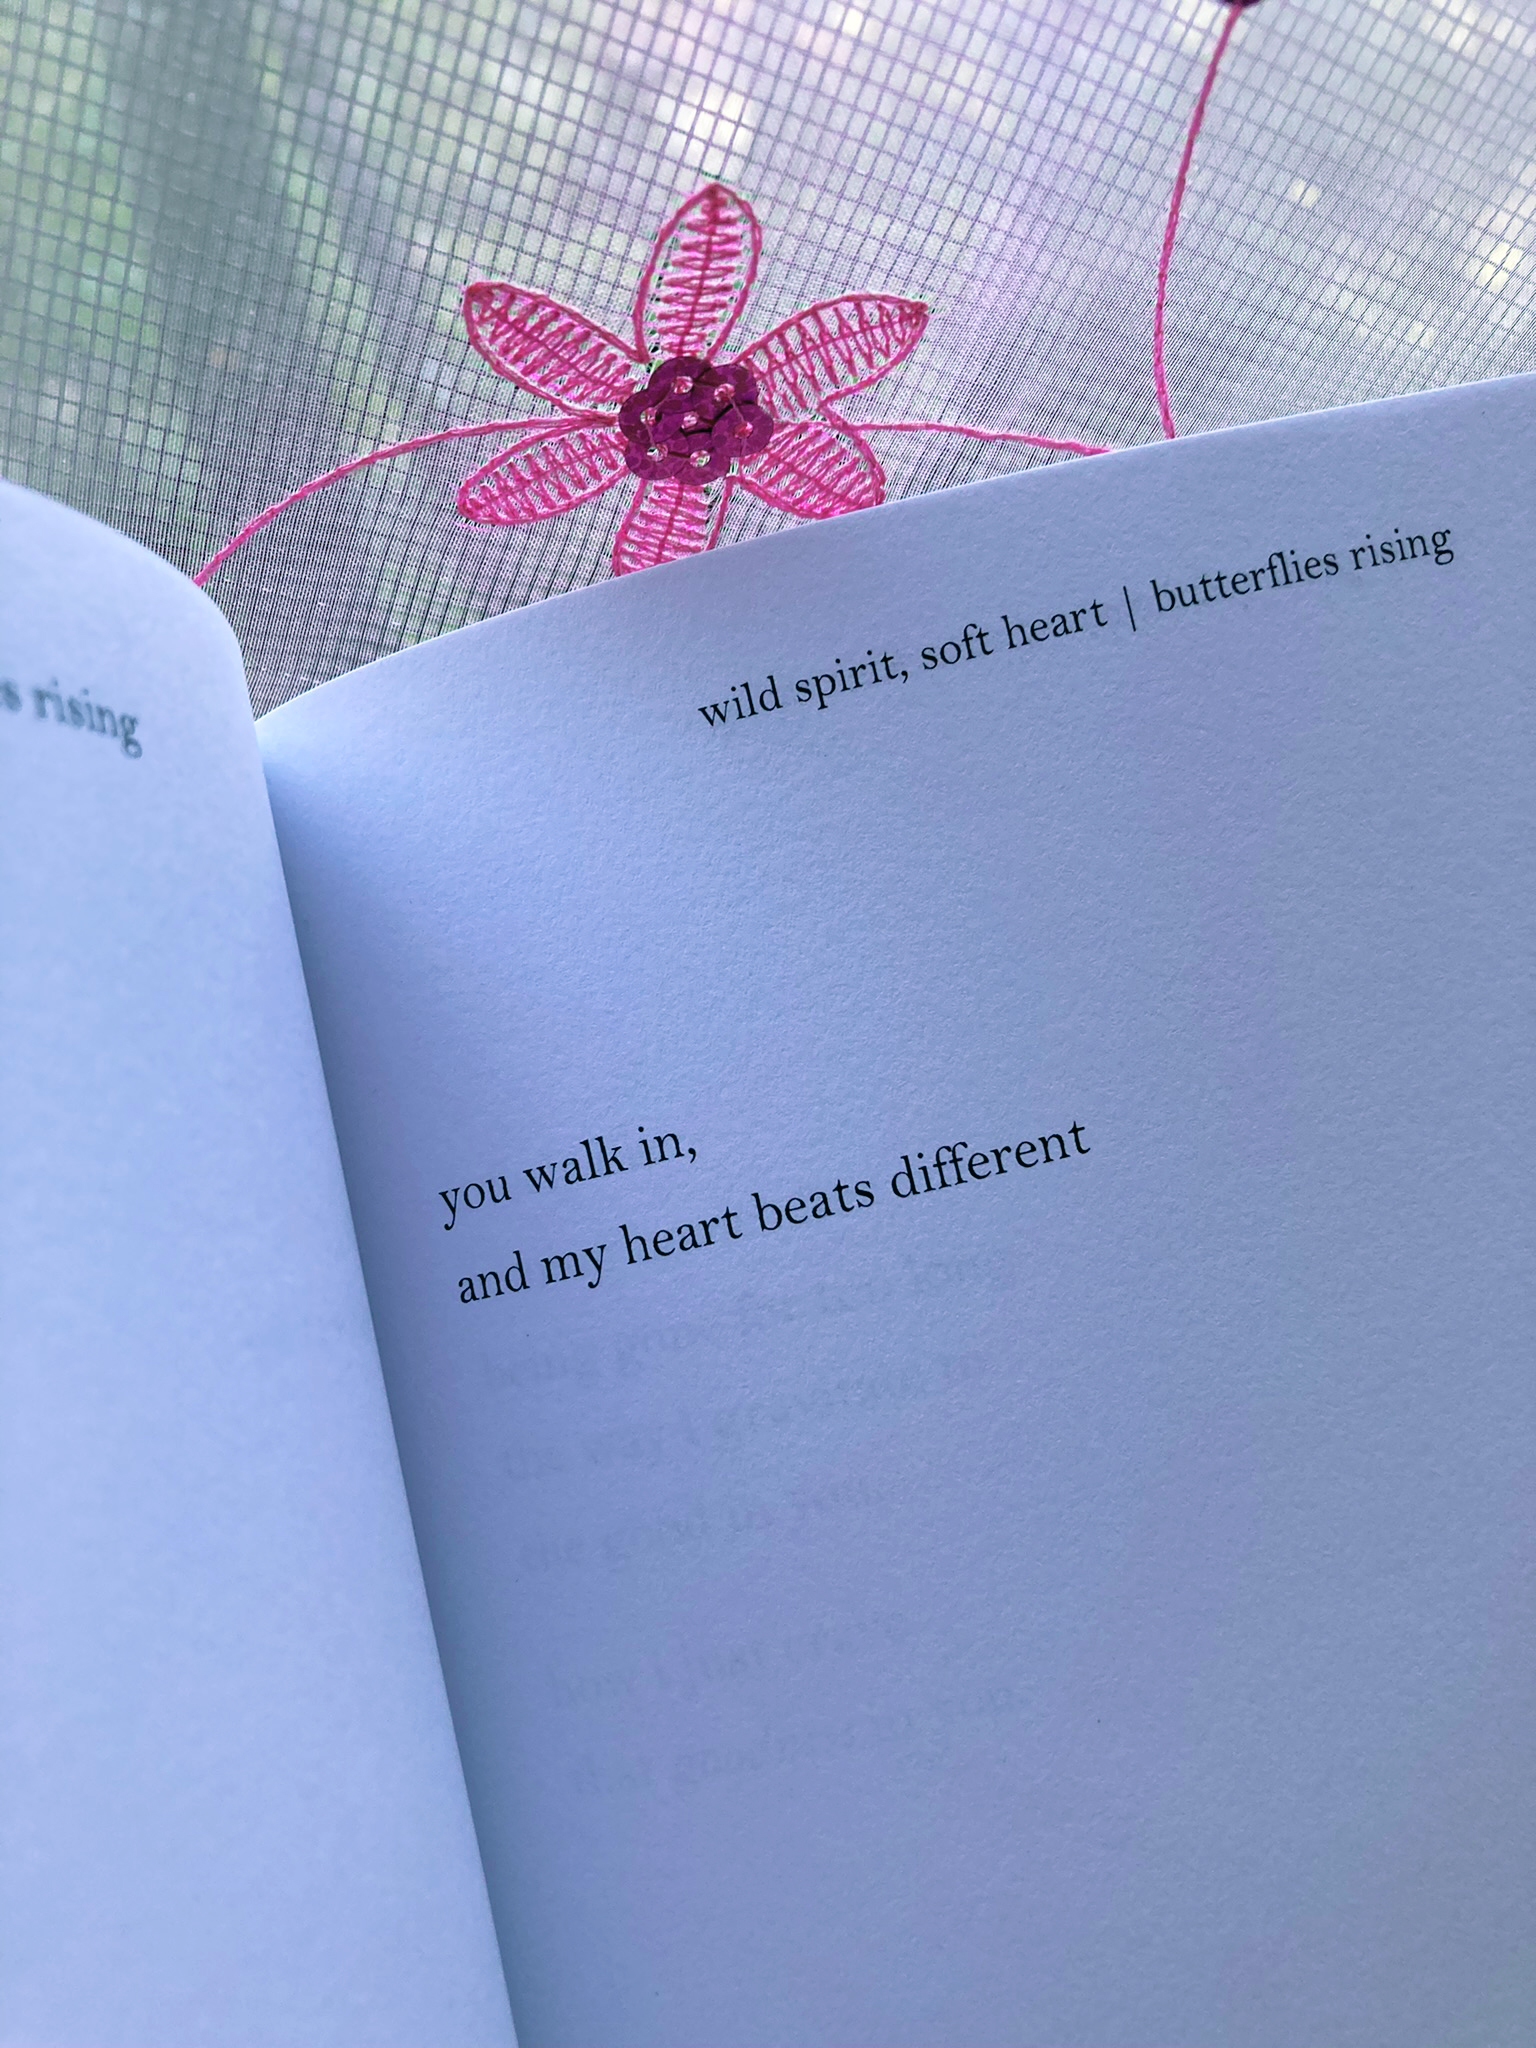 you walk in, and my heart beats different - butterflies rising quote